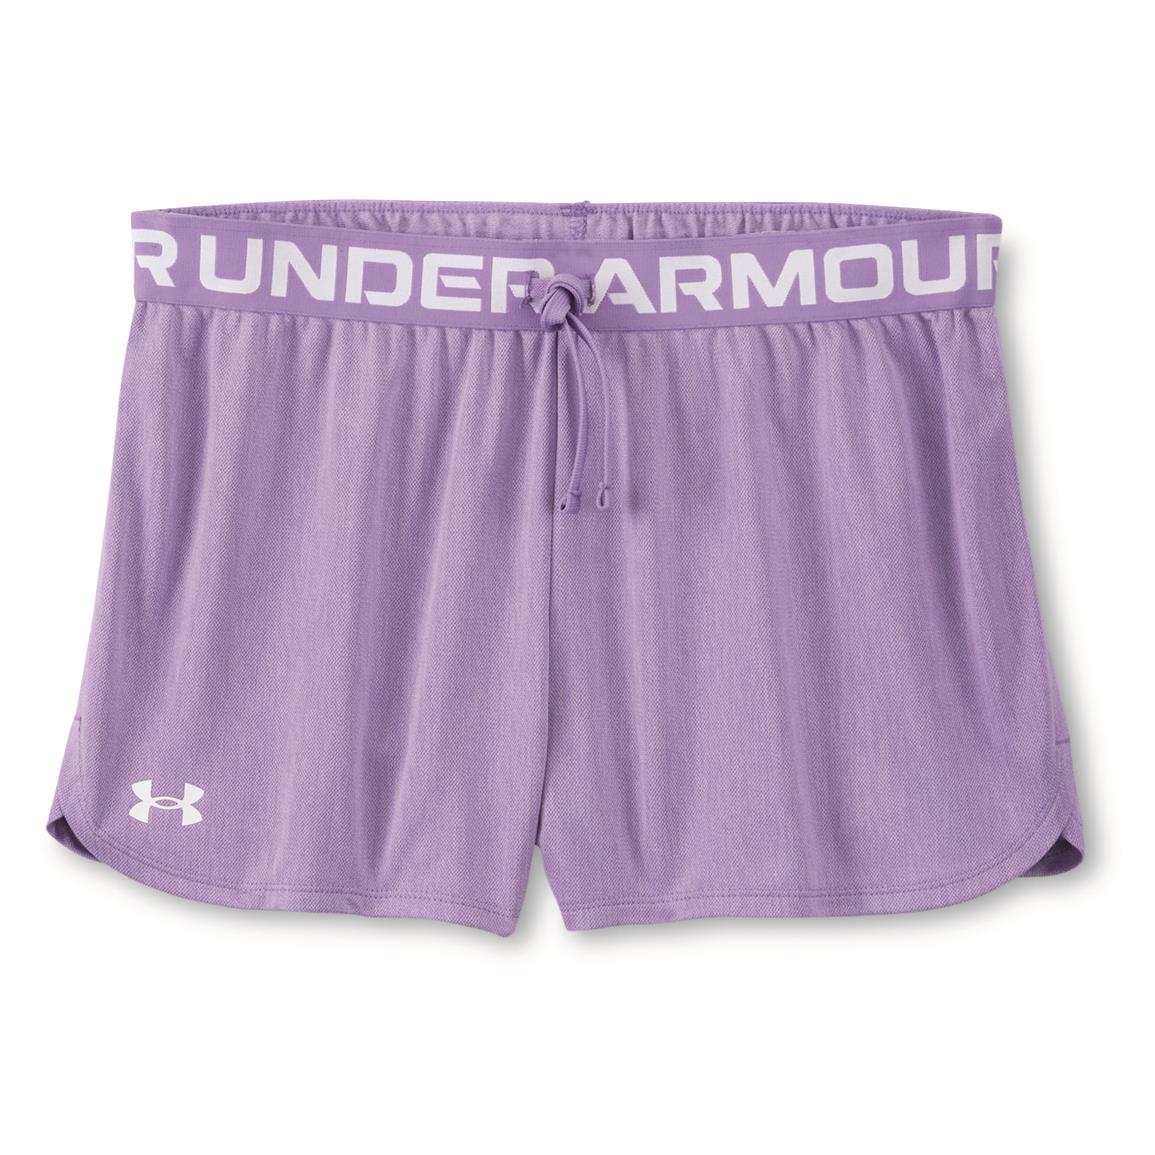 Under Armour Girls' Play Up Twist Shorts, Vivid Lilac/white